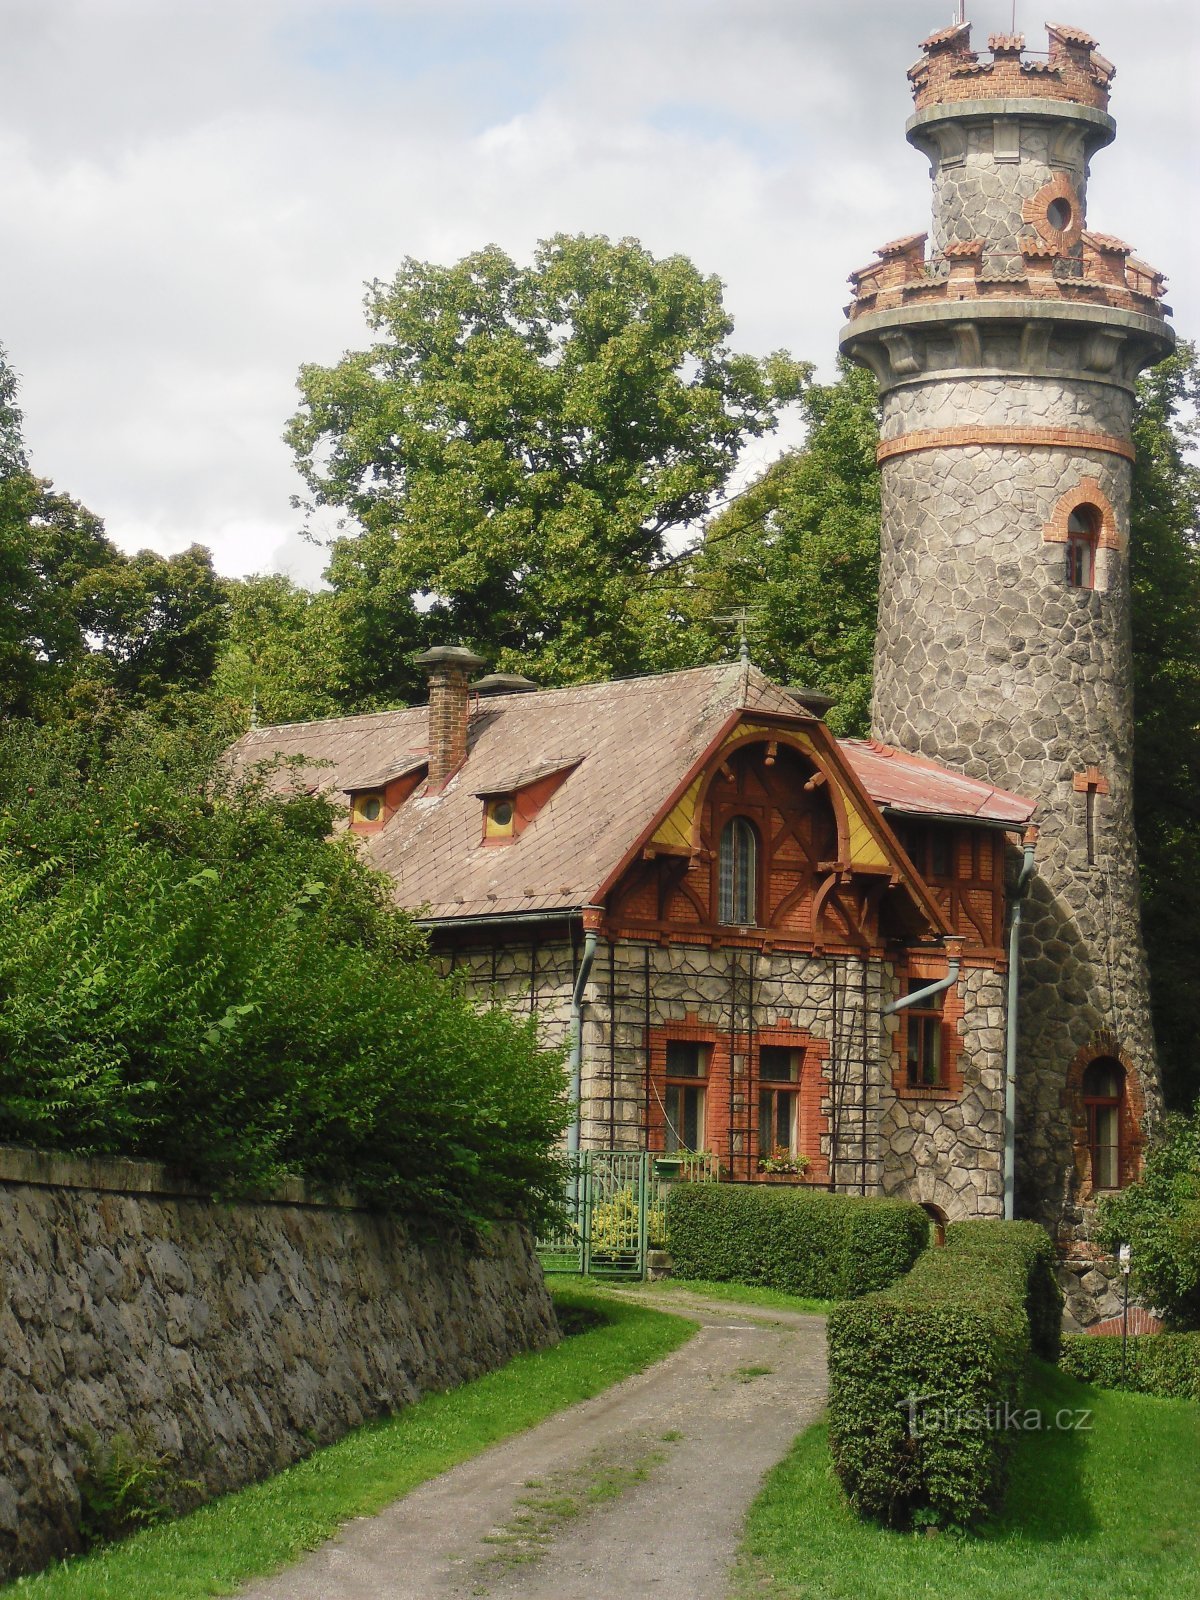 a dyke's house with a castle-like tower